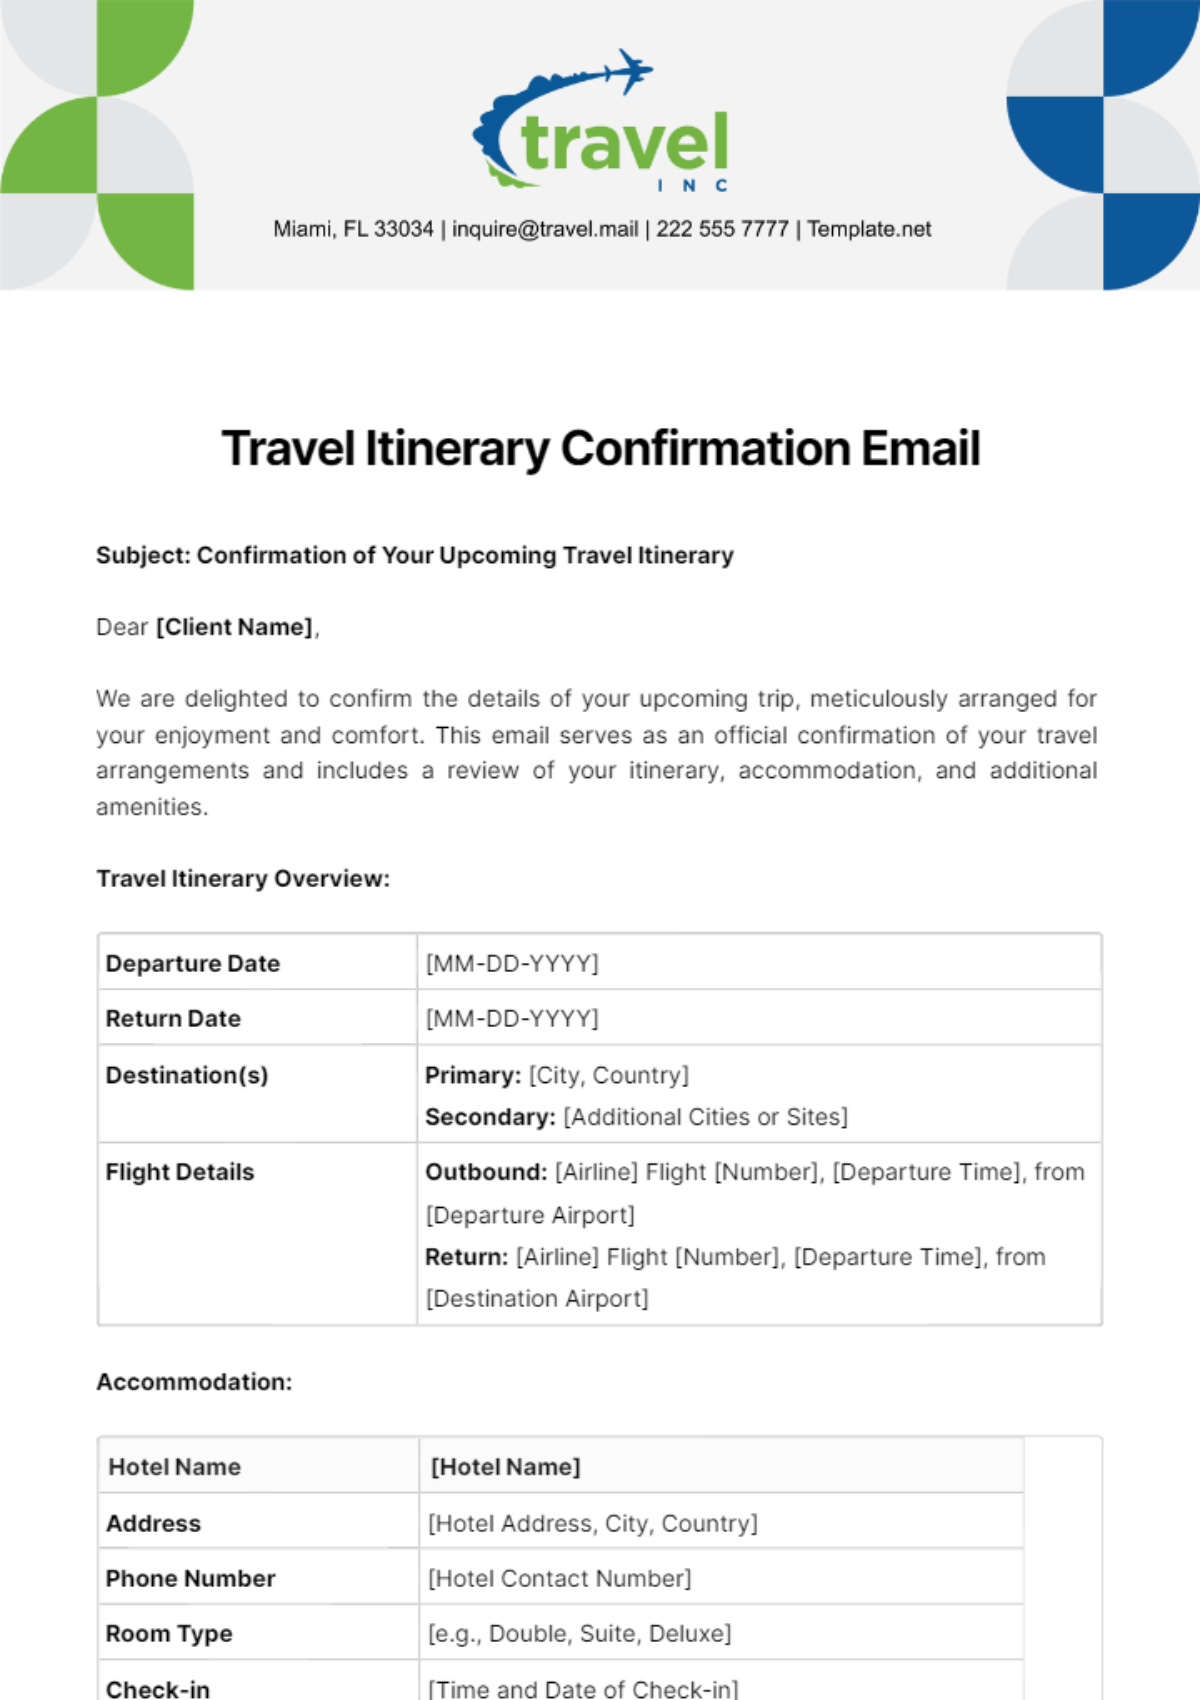 Travel Agency Confirmation Email Template